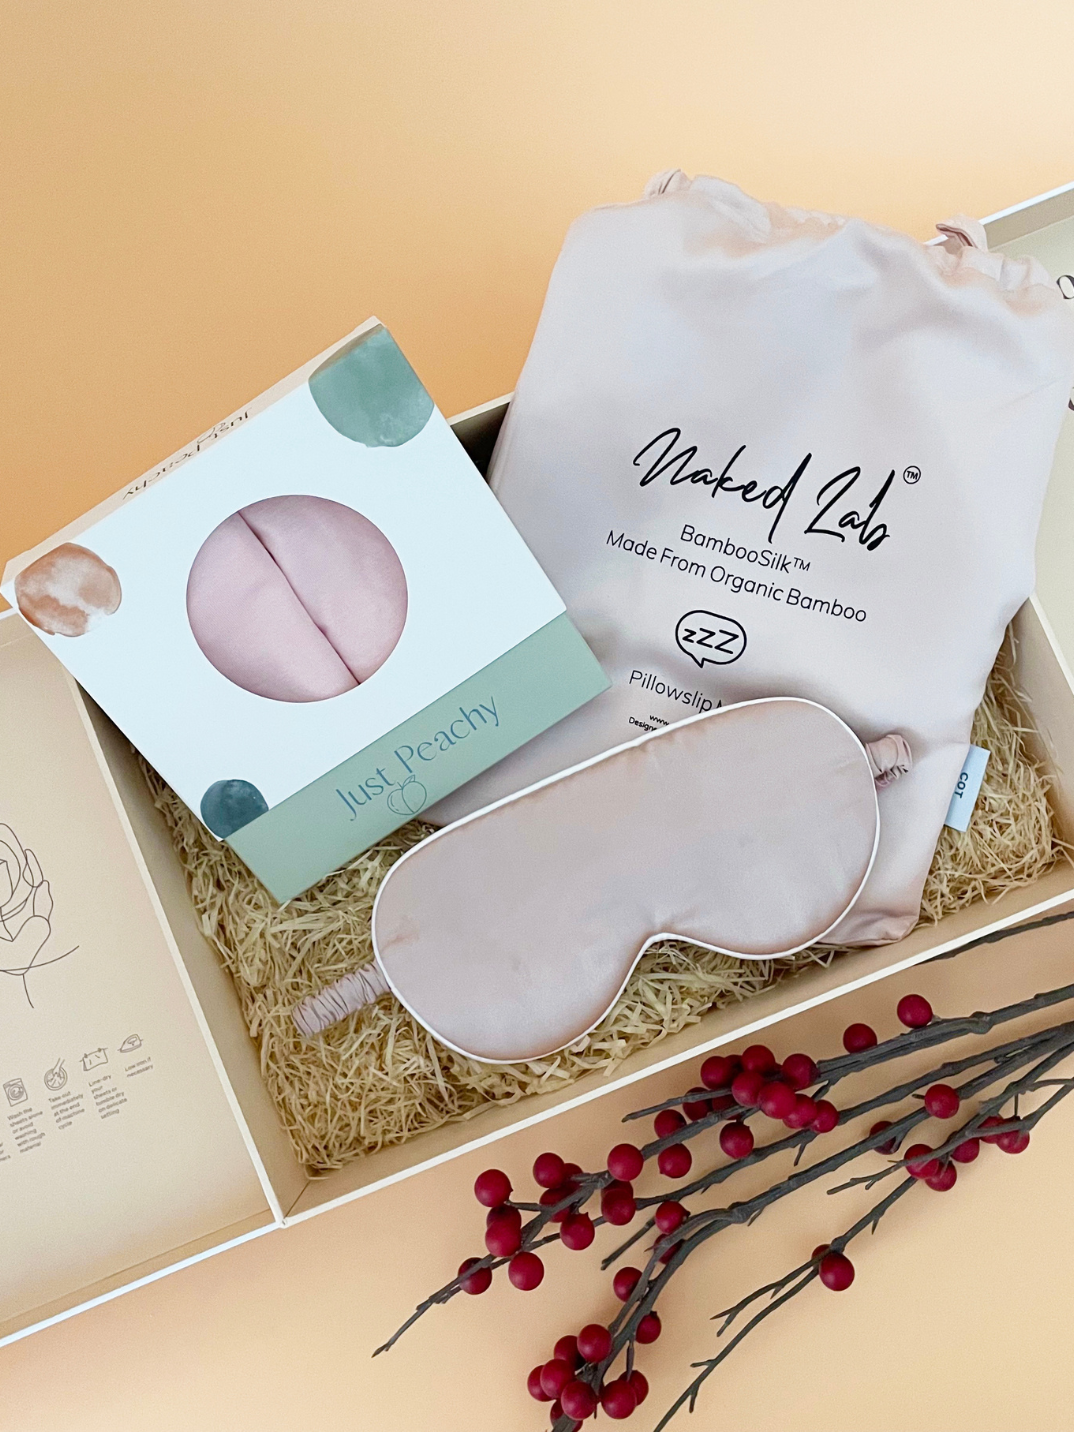 Spoil little ones with this Limited Edition Feel Good Snoozin’ Gift Set curated in collaboration with NakedLab. Each set includes Just Peachy TENCEL™ Micro Modal Top & Bottom, NakedLab Bamboo Silk Kids Pillowcase and a luxurious sleep mask for a peaceful night’s rest. Shop now. Pink color gift set for kids.